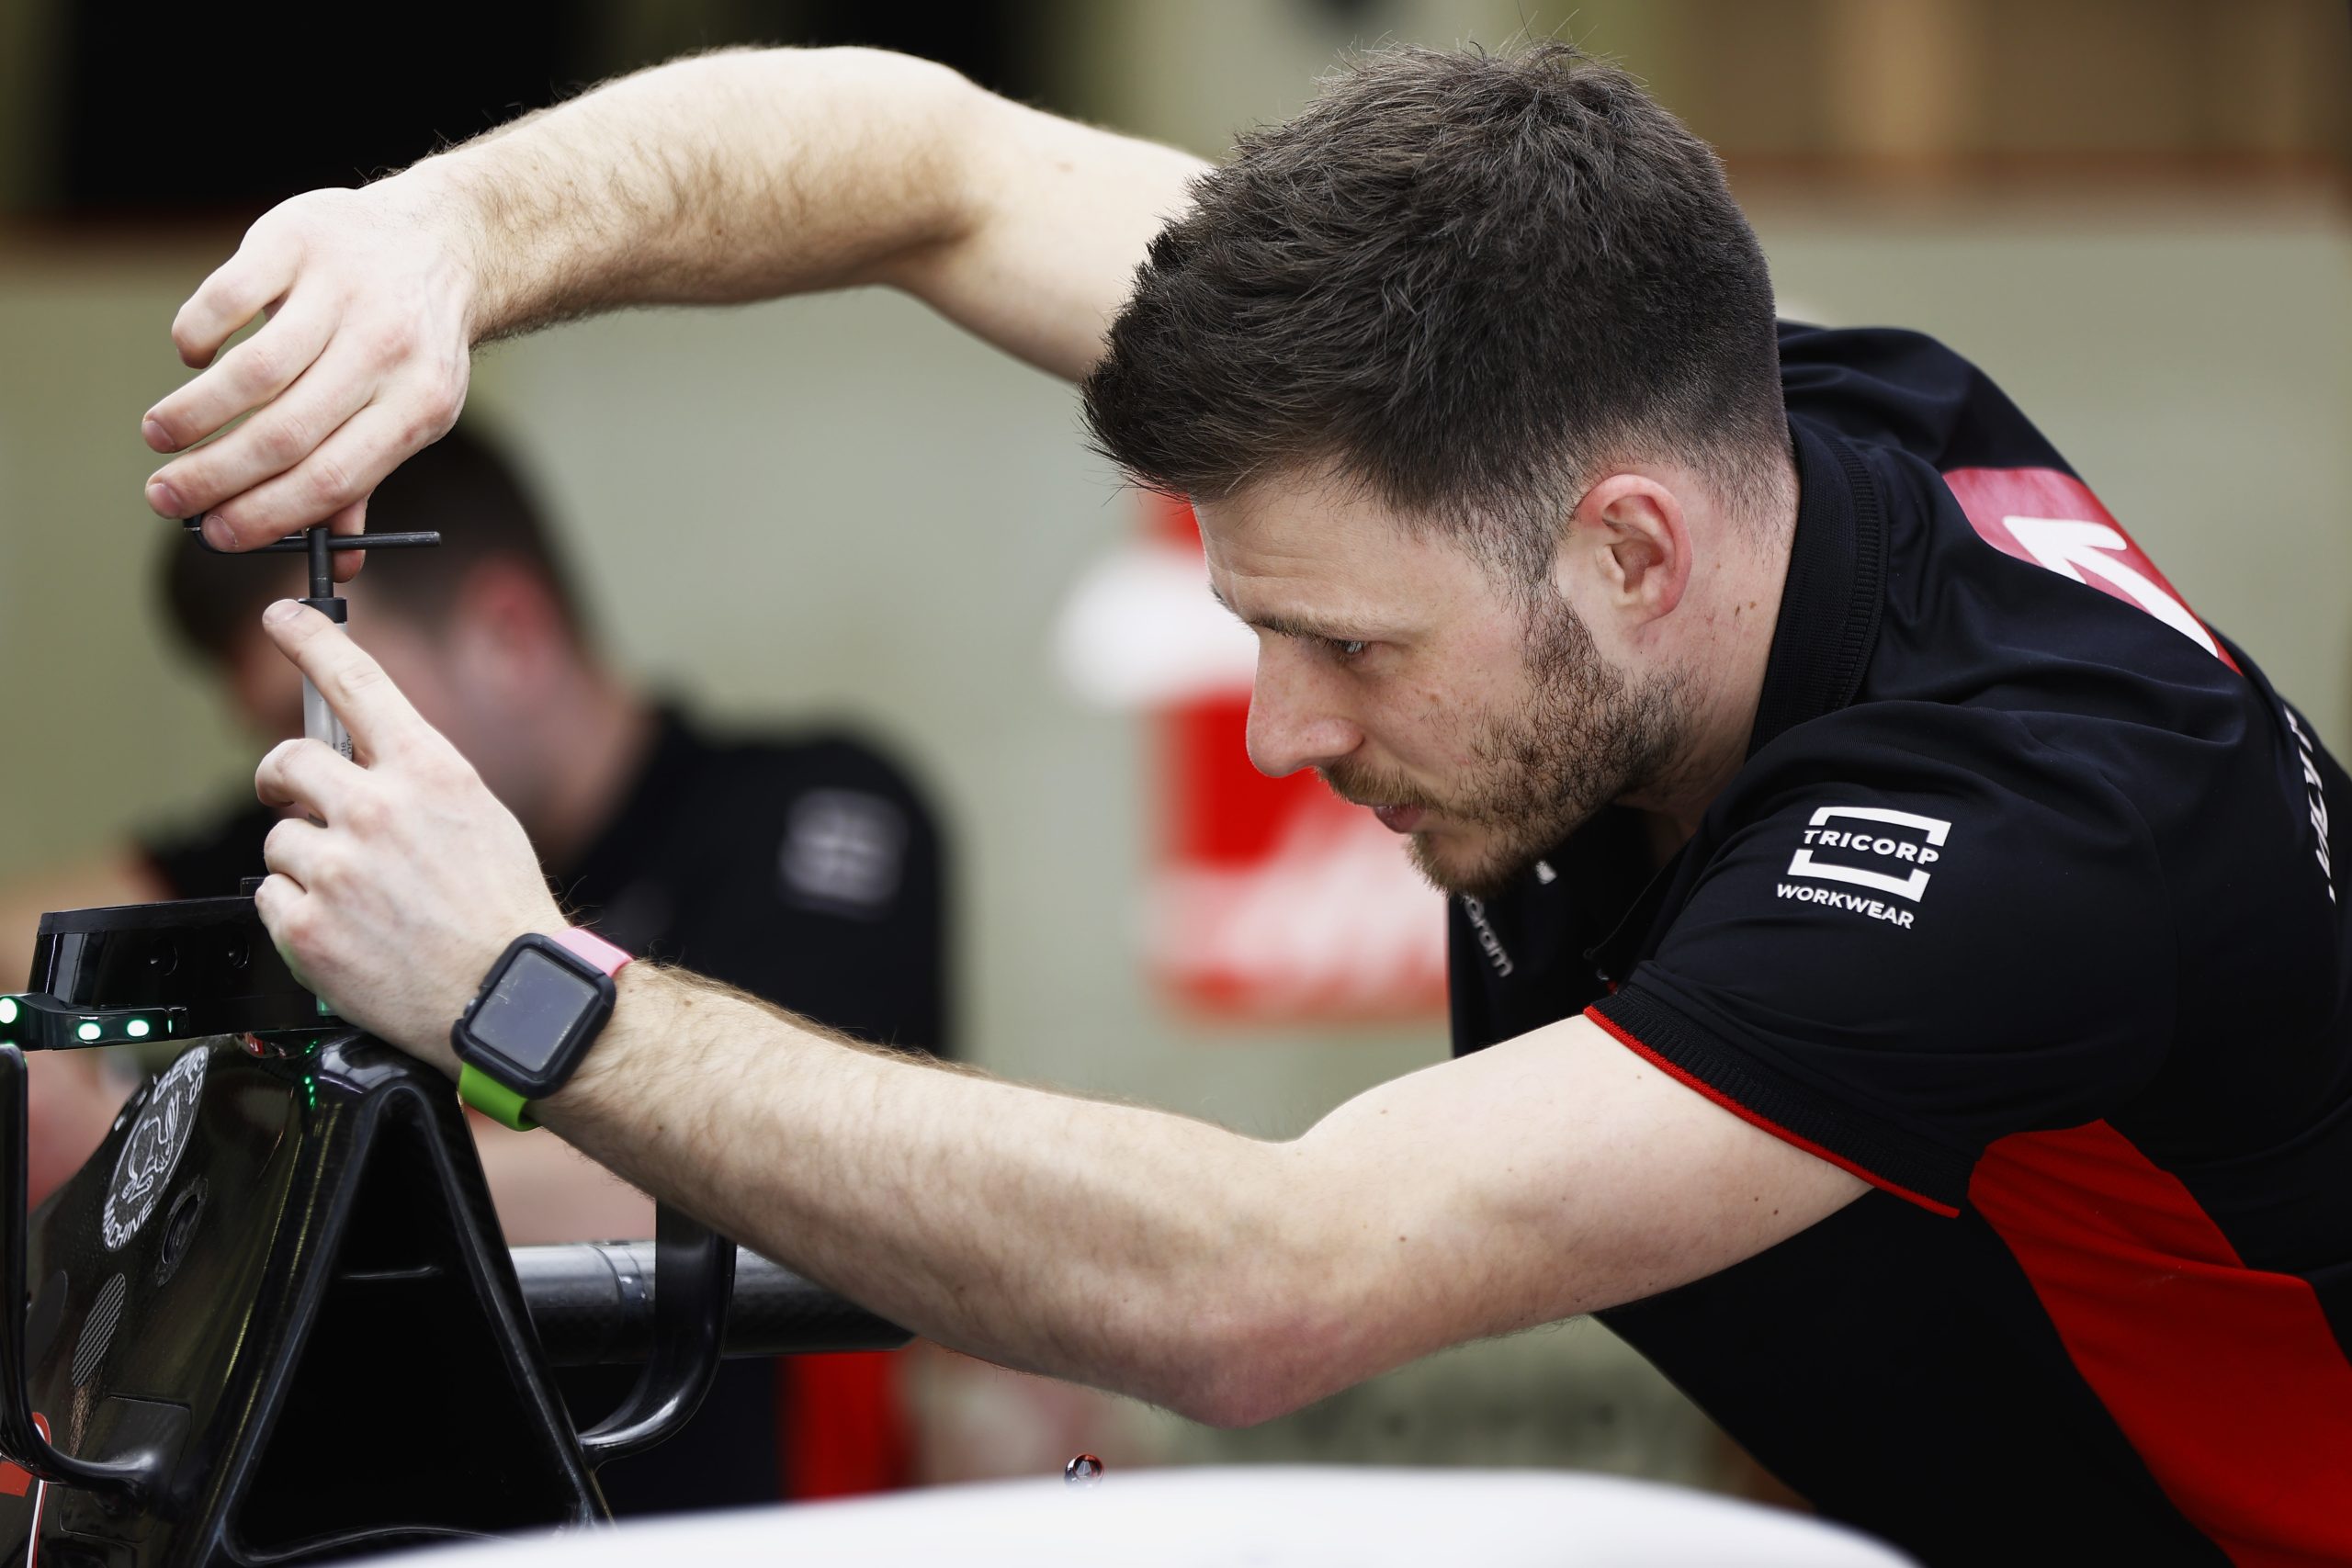 BAHRAIN INTERNATIONAL CIRCUIT, BAHRAIN - MARCH 02: A Haas F1 Team mechanic at work in the garage during the Bahrain GP at Bahrain International Circuit on Thursday March 02, 2023 in Sakhir, Bahrain. (Photo by Andy Hone / LAT Images)